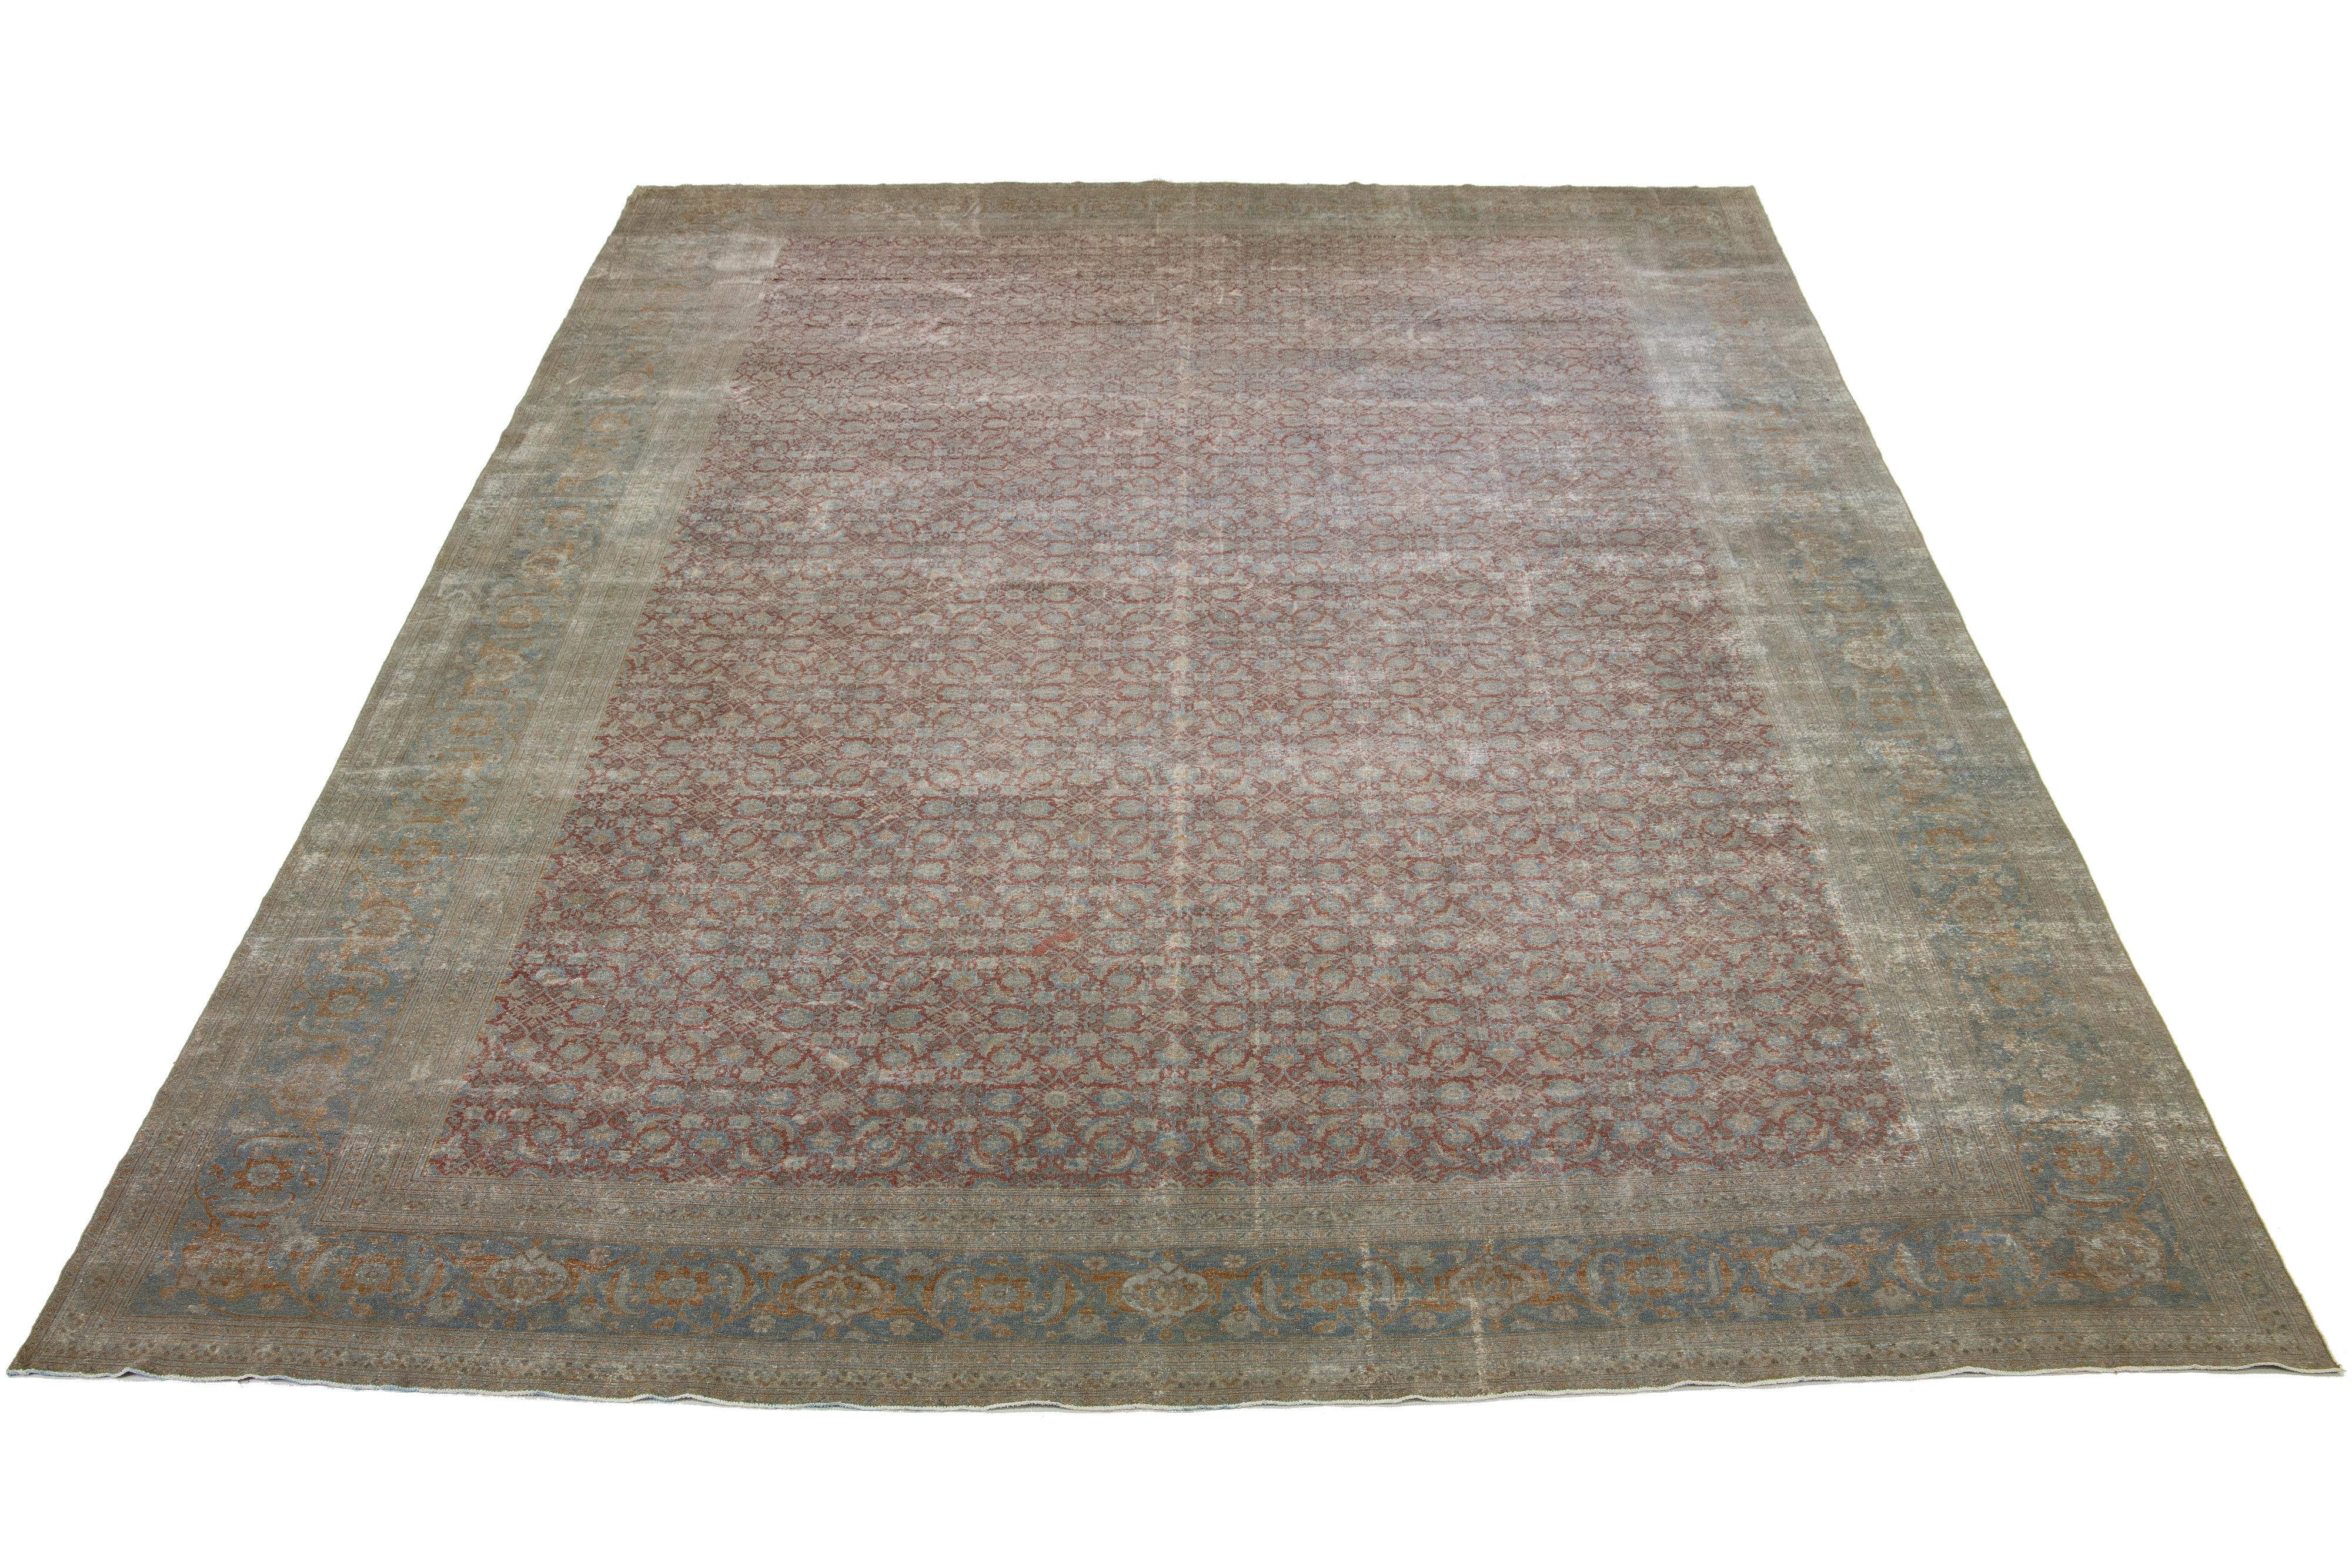 This Persian Tabriz wool rug features a classic all-over floral pattern on a rust background with shades of orange and light blue. The rug is beautifully handcrafted.

This rug measures  14'2